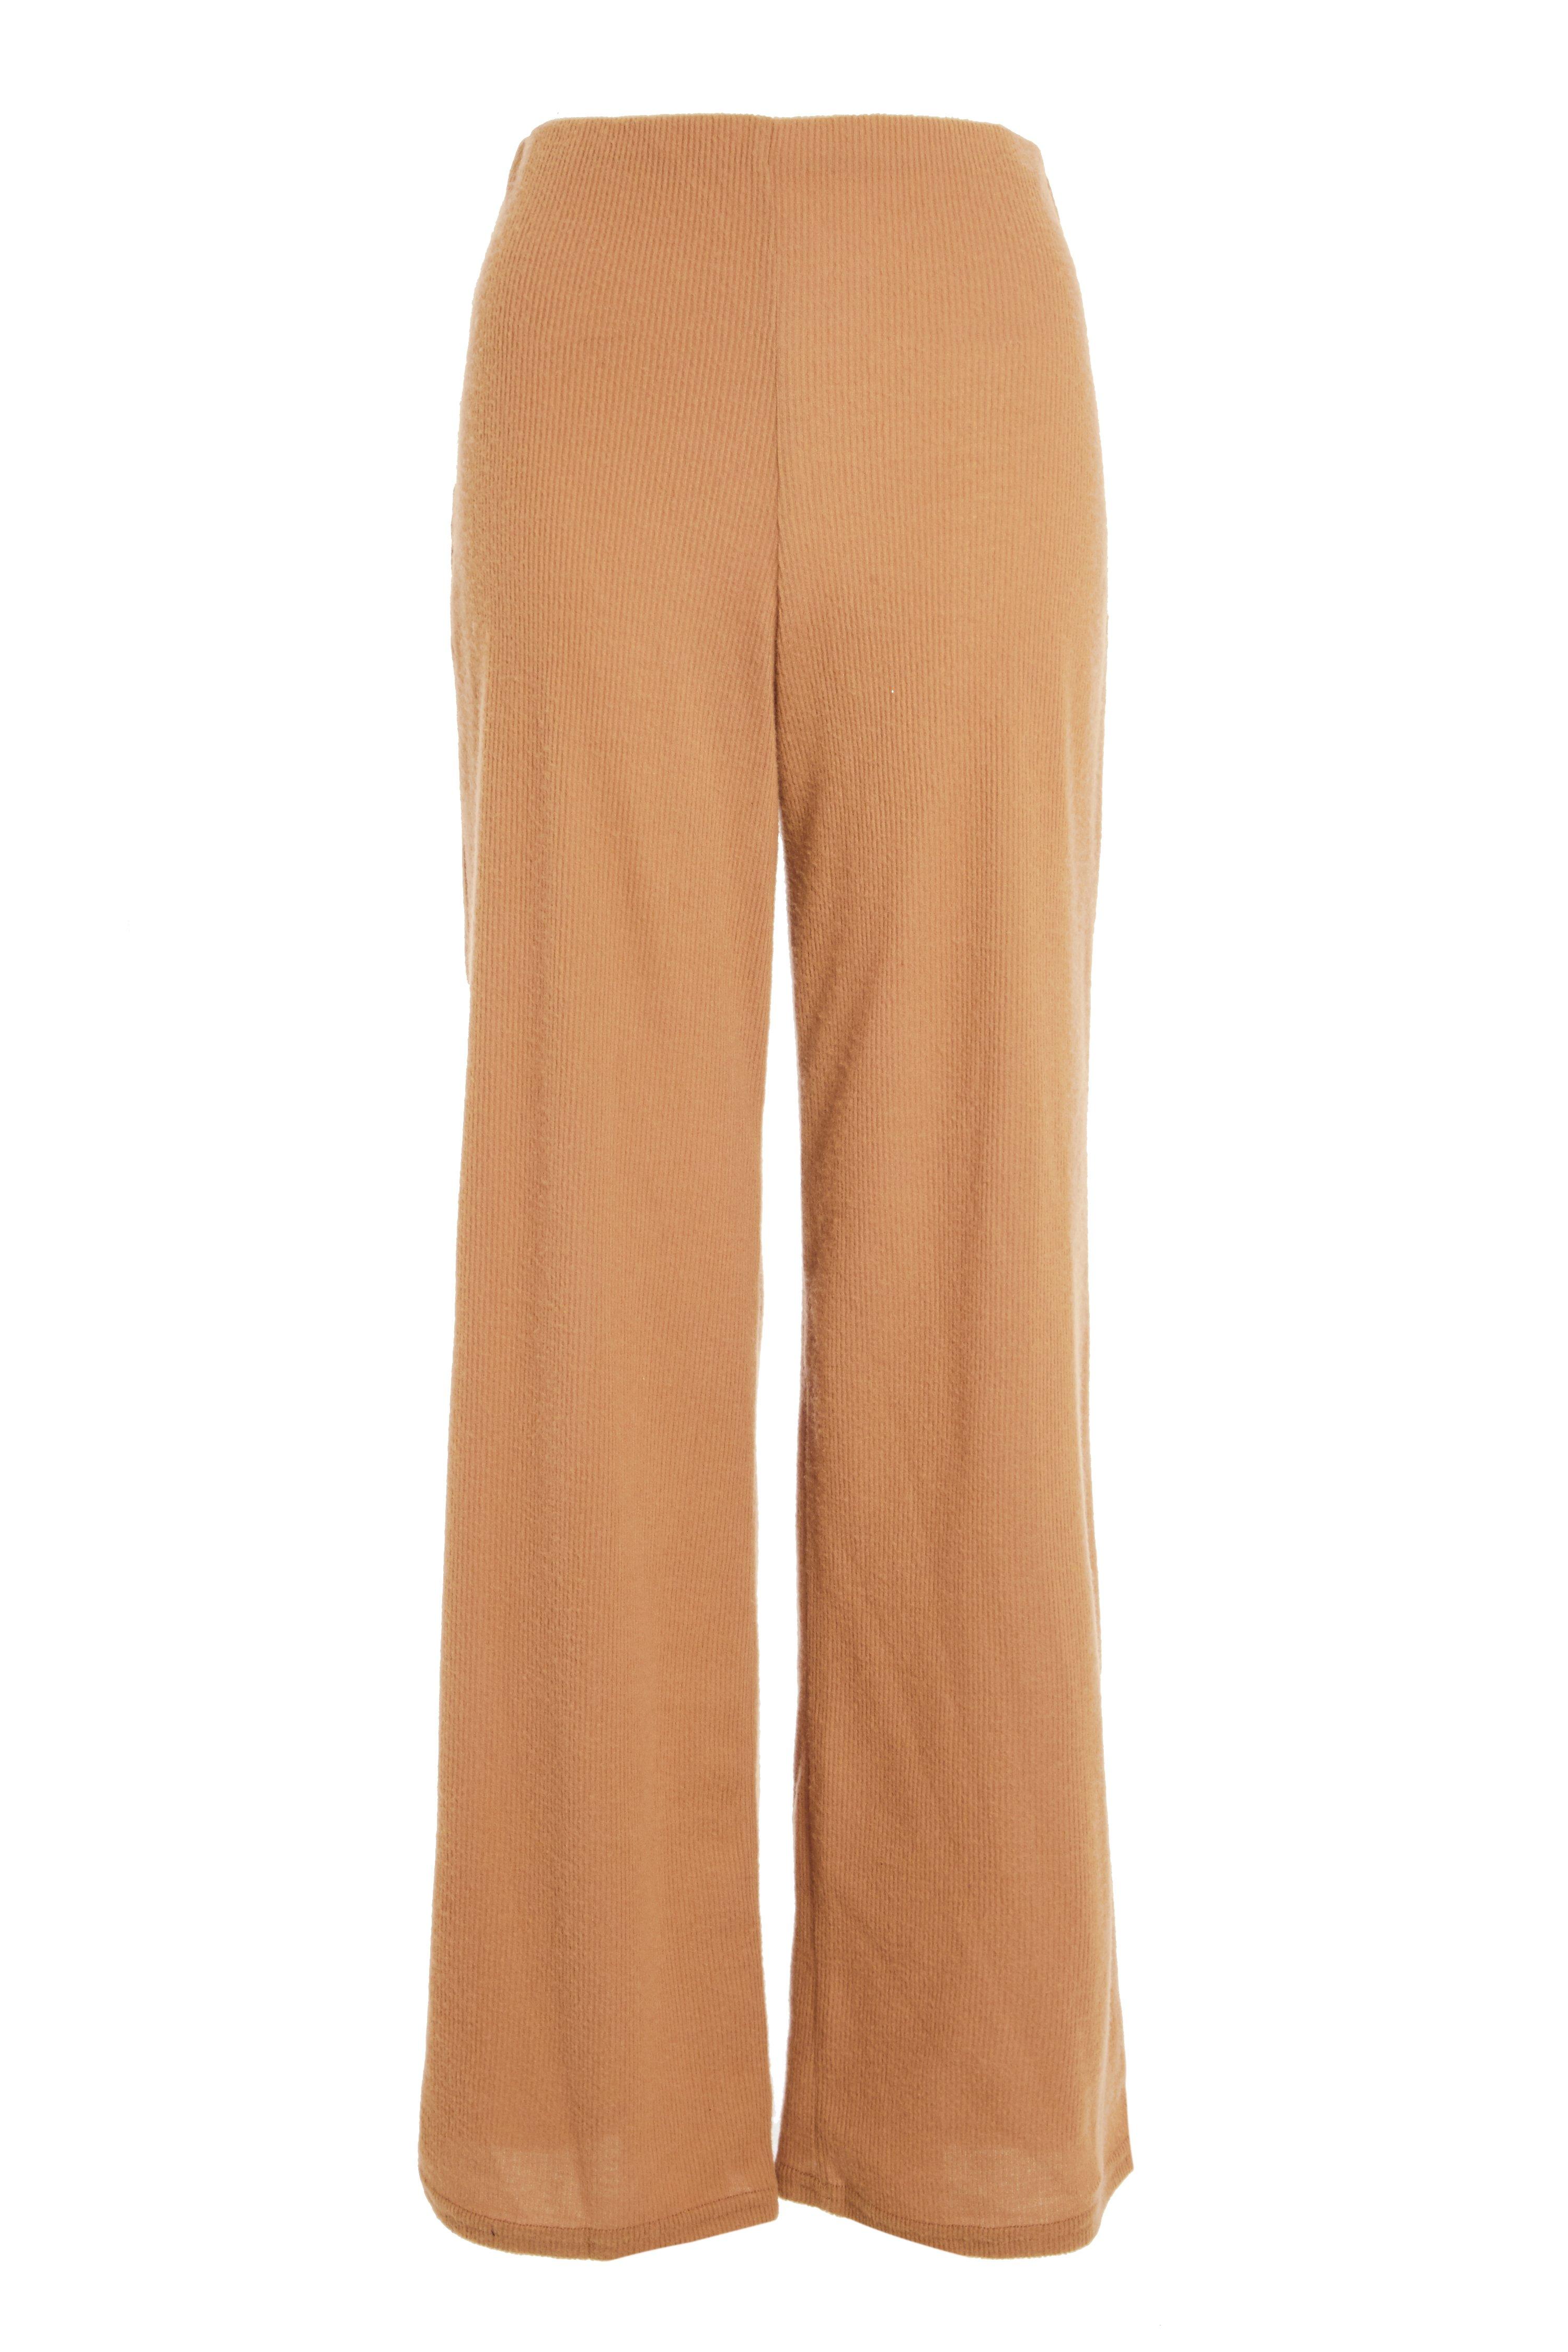 Camel Ribbed Palazzo Trousers - Quiz Clothing